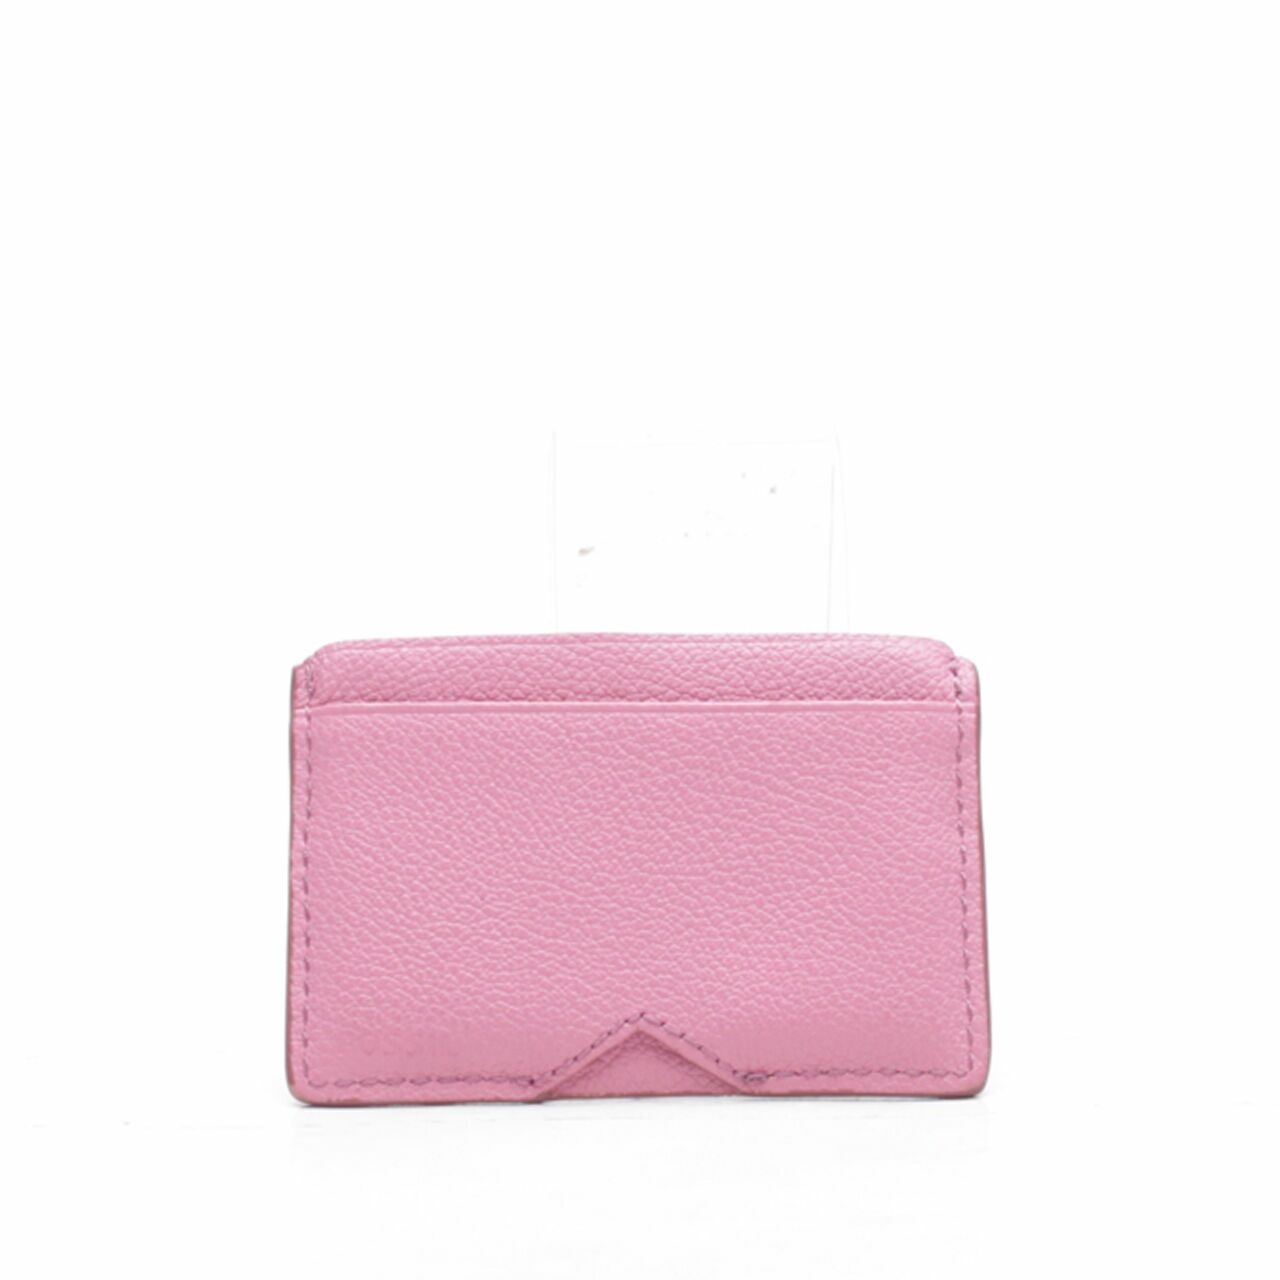 Fossil  Pink Perforated Card Case Wallet 